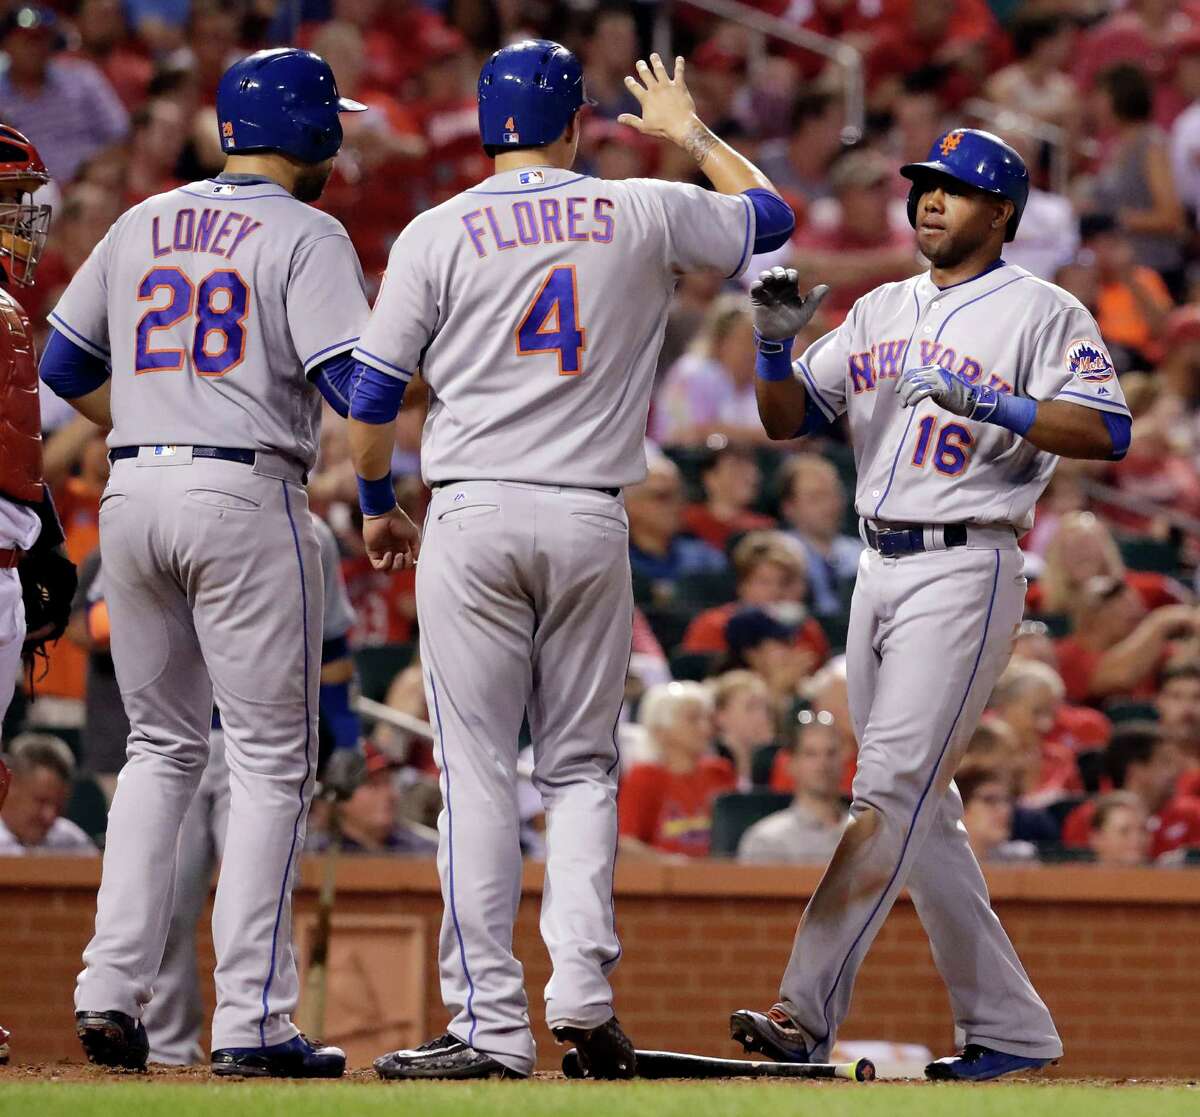 New York Mets' Alejandro De Aza, right, is congratulated by teammates James Loney (28) and Wilmer Flores (4) after hitting a three-run home run during the fifth inning of a baseball game against the St. Louis Cardinals Thursday, Aug. 25, 2016, in St. Louis. (AP Photo/Jeff Roberson) ORG XMIT: MOJR113